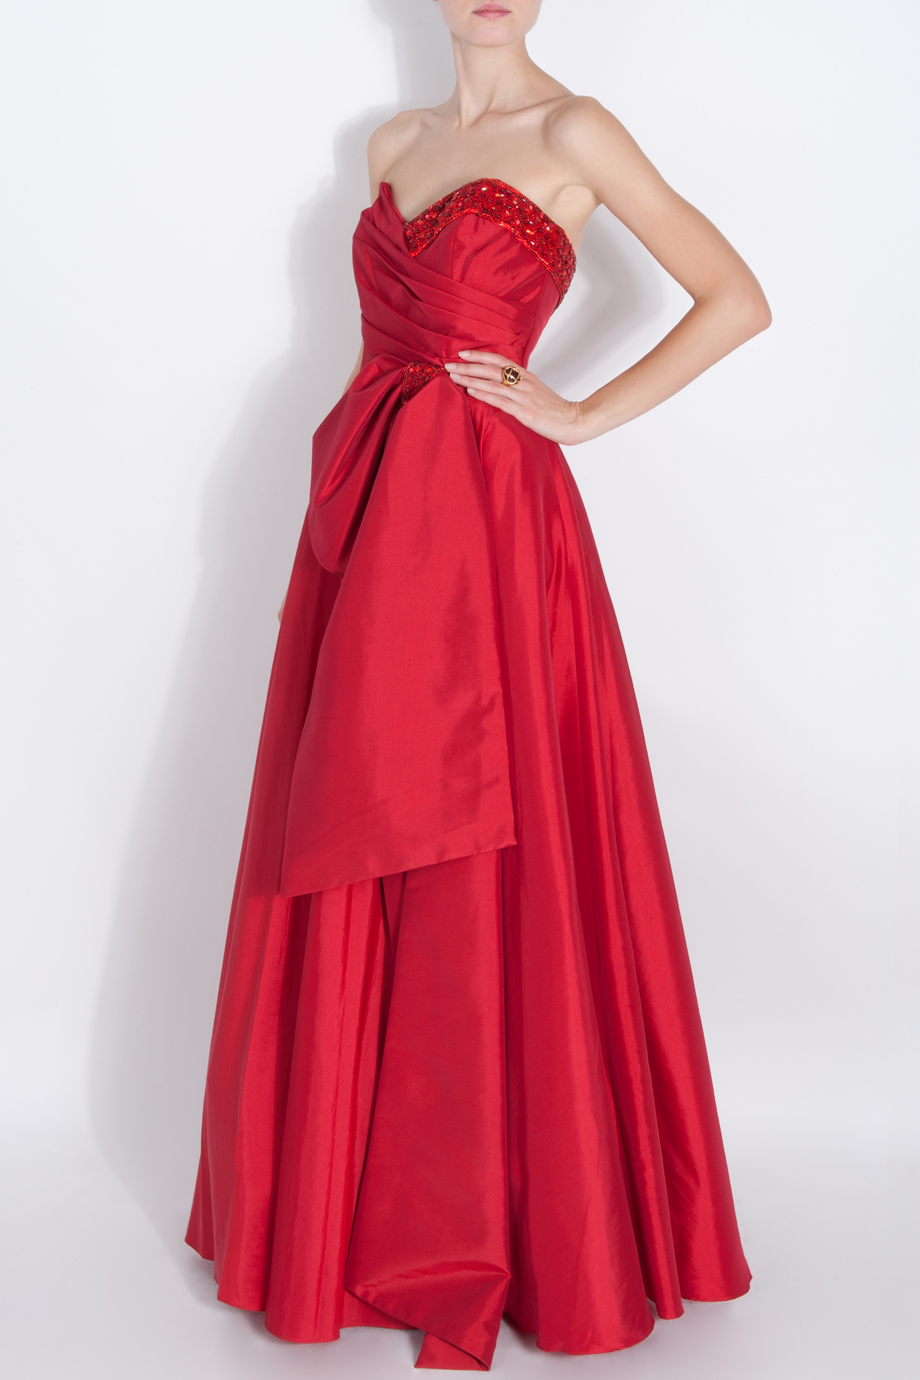 Lyst - Notte by marchesa Strapless Full Skirt Gown in Red